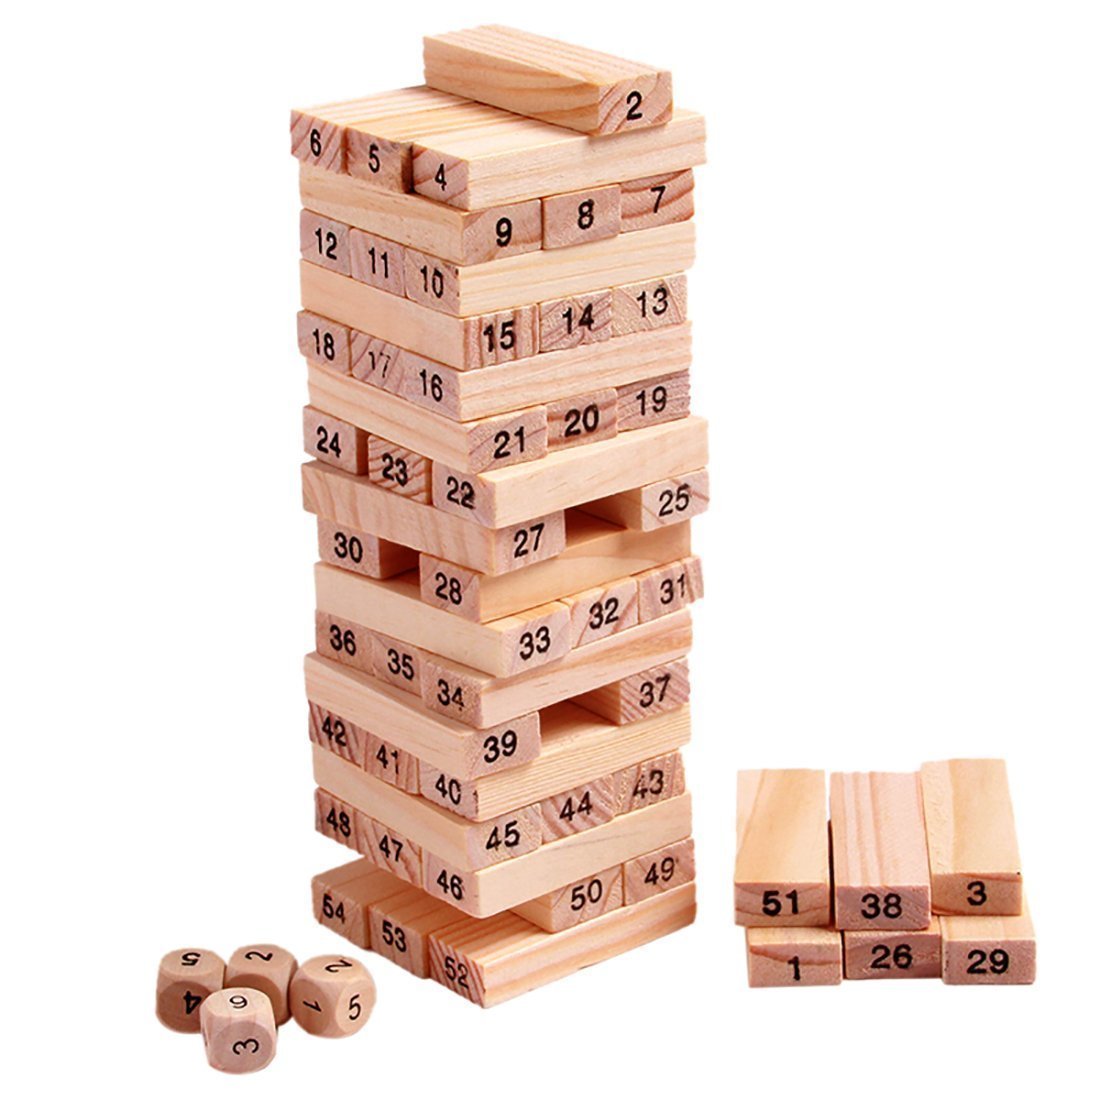 Multi Coloured 51 Pcs Blocks, Dices Wooden Numbered Building Bricks Stacking Classic Traditional Toppling Tumbling Tower Game Kid Gift - Challenging Maths for Adults and Kids